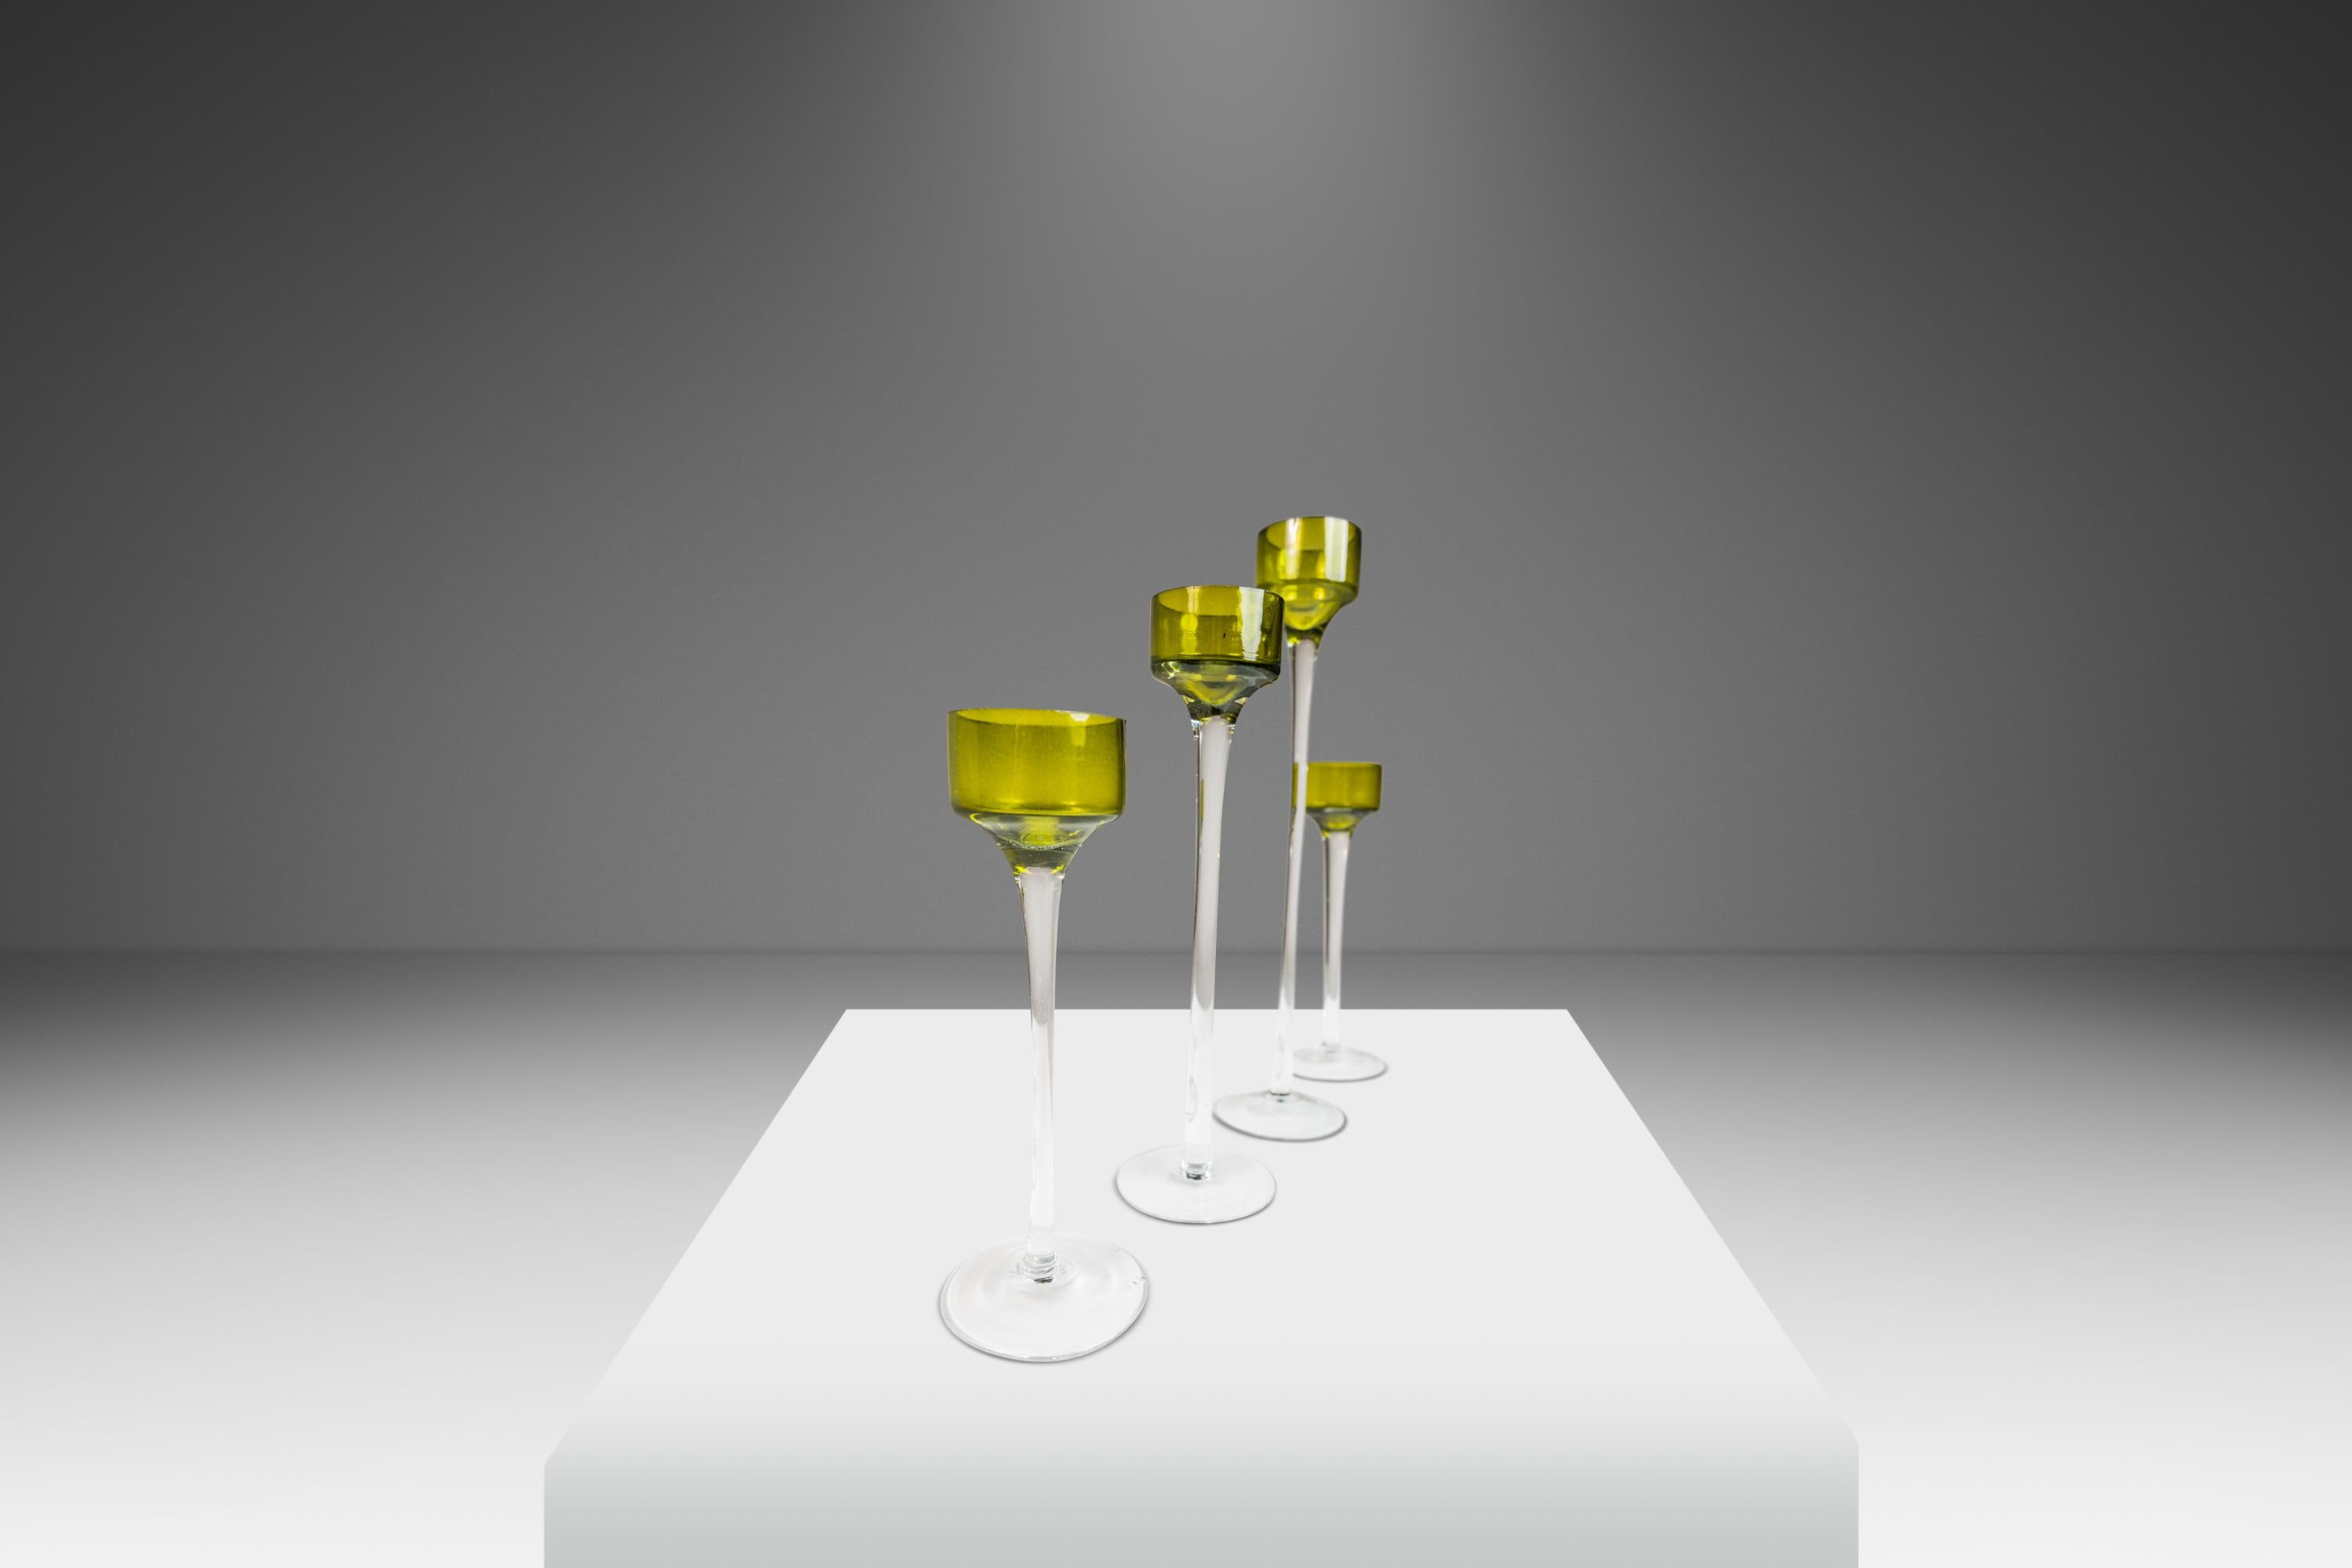  Introducing an artfully crafted set of four Italian Modern blown glass candlestick holders. Like snowflakes no two are alike and each is ever so slightly different in size and shape. With elegant elongated shapes these exquisite art pieces feature